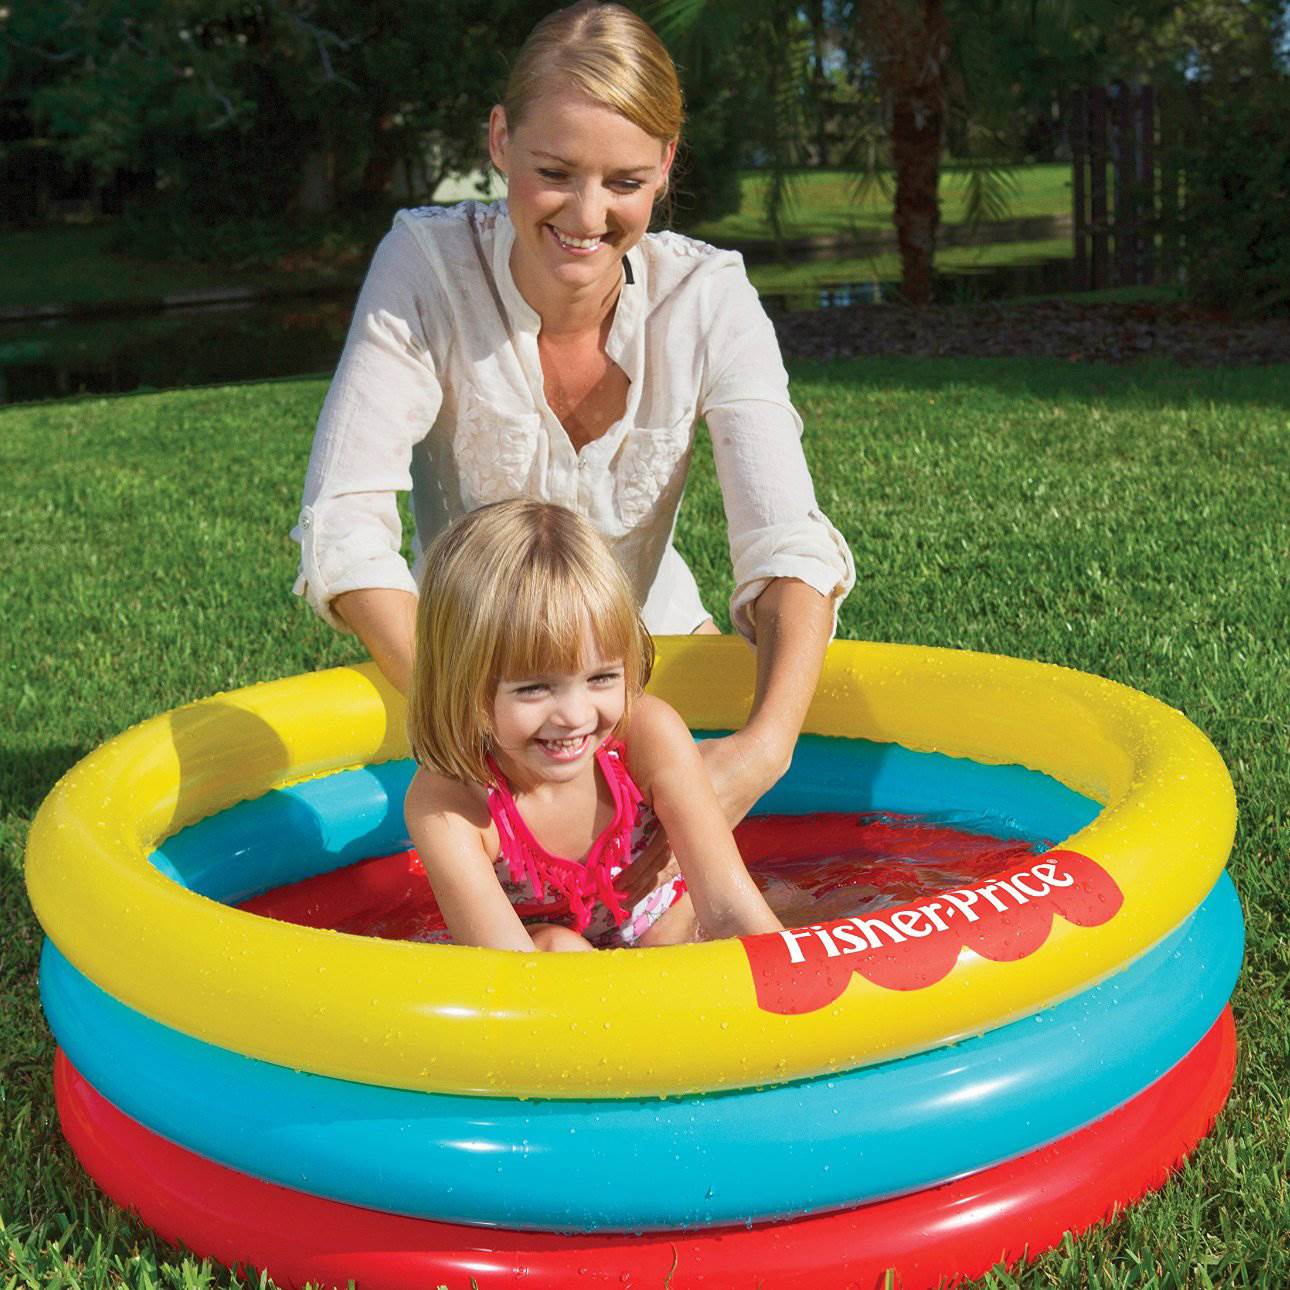 Fisher-Price 3 Ring Fun And Colorful Ball Pit Pool For Ages 2 And Up | 93501E-BW - image 4 of 5